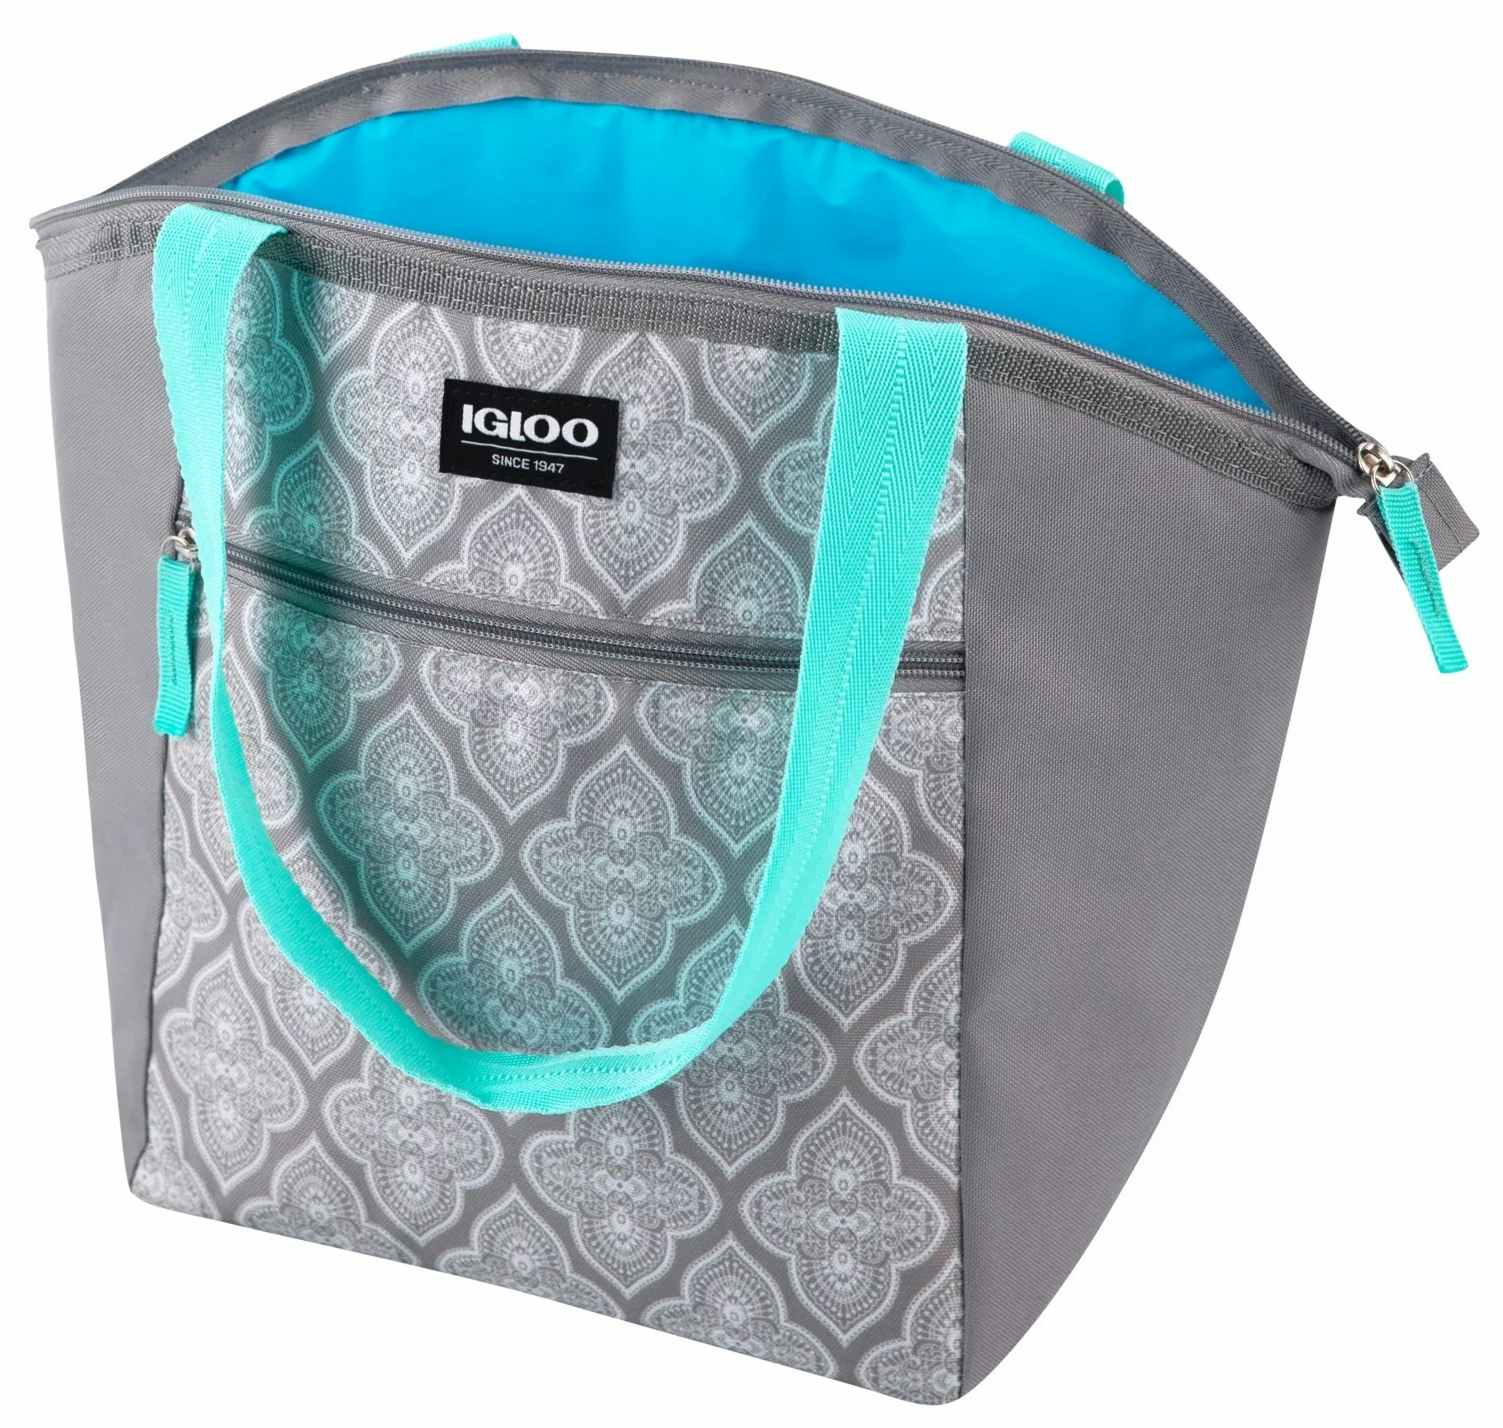 stock image of grey, teal, and white igloo lunch tote